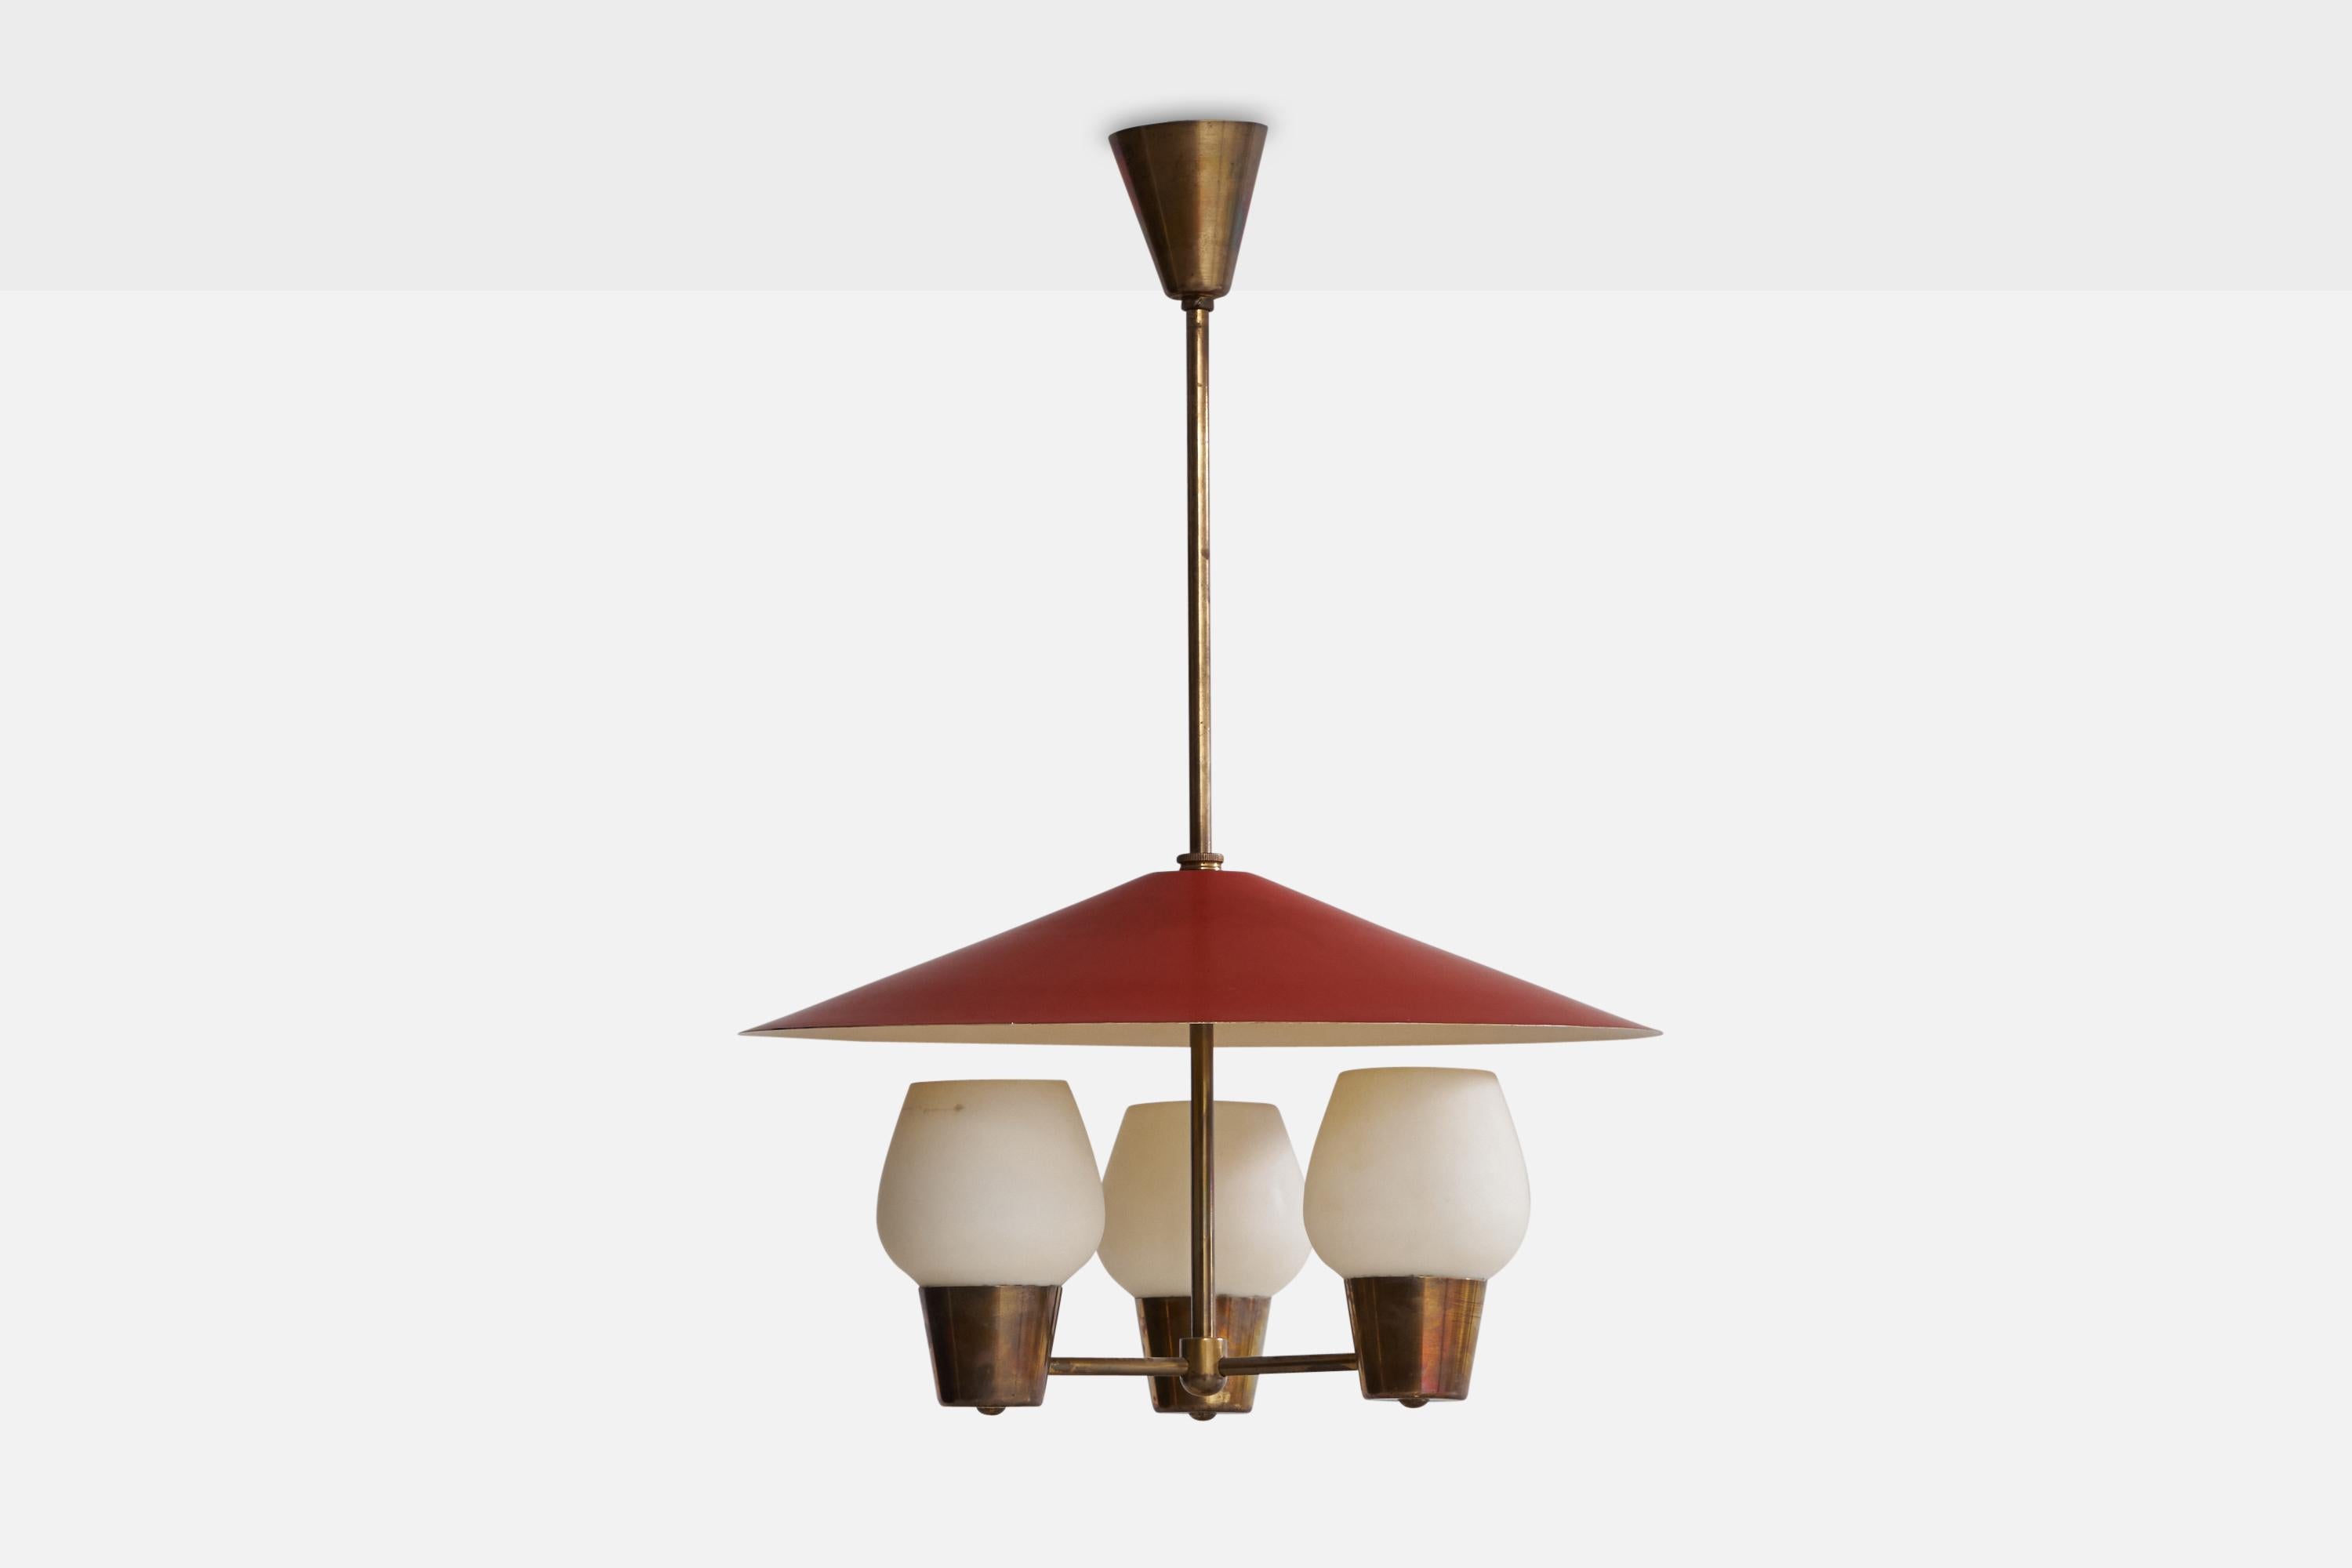 A brass, red-lacquered metal and opaline glass chandelier attributed to Bent Karlby for Lyfa, Denmark, 1950s.

Dimensions of canopy (inches): 3.78” H x 3.38” Diameter
Socket takes standard E-26 bulbs. 3 sockets.There is no maximum wattage stated on